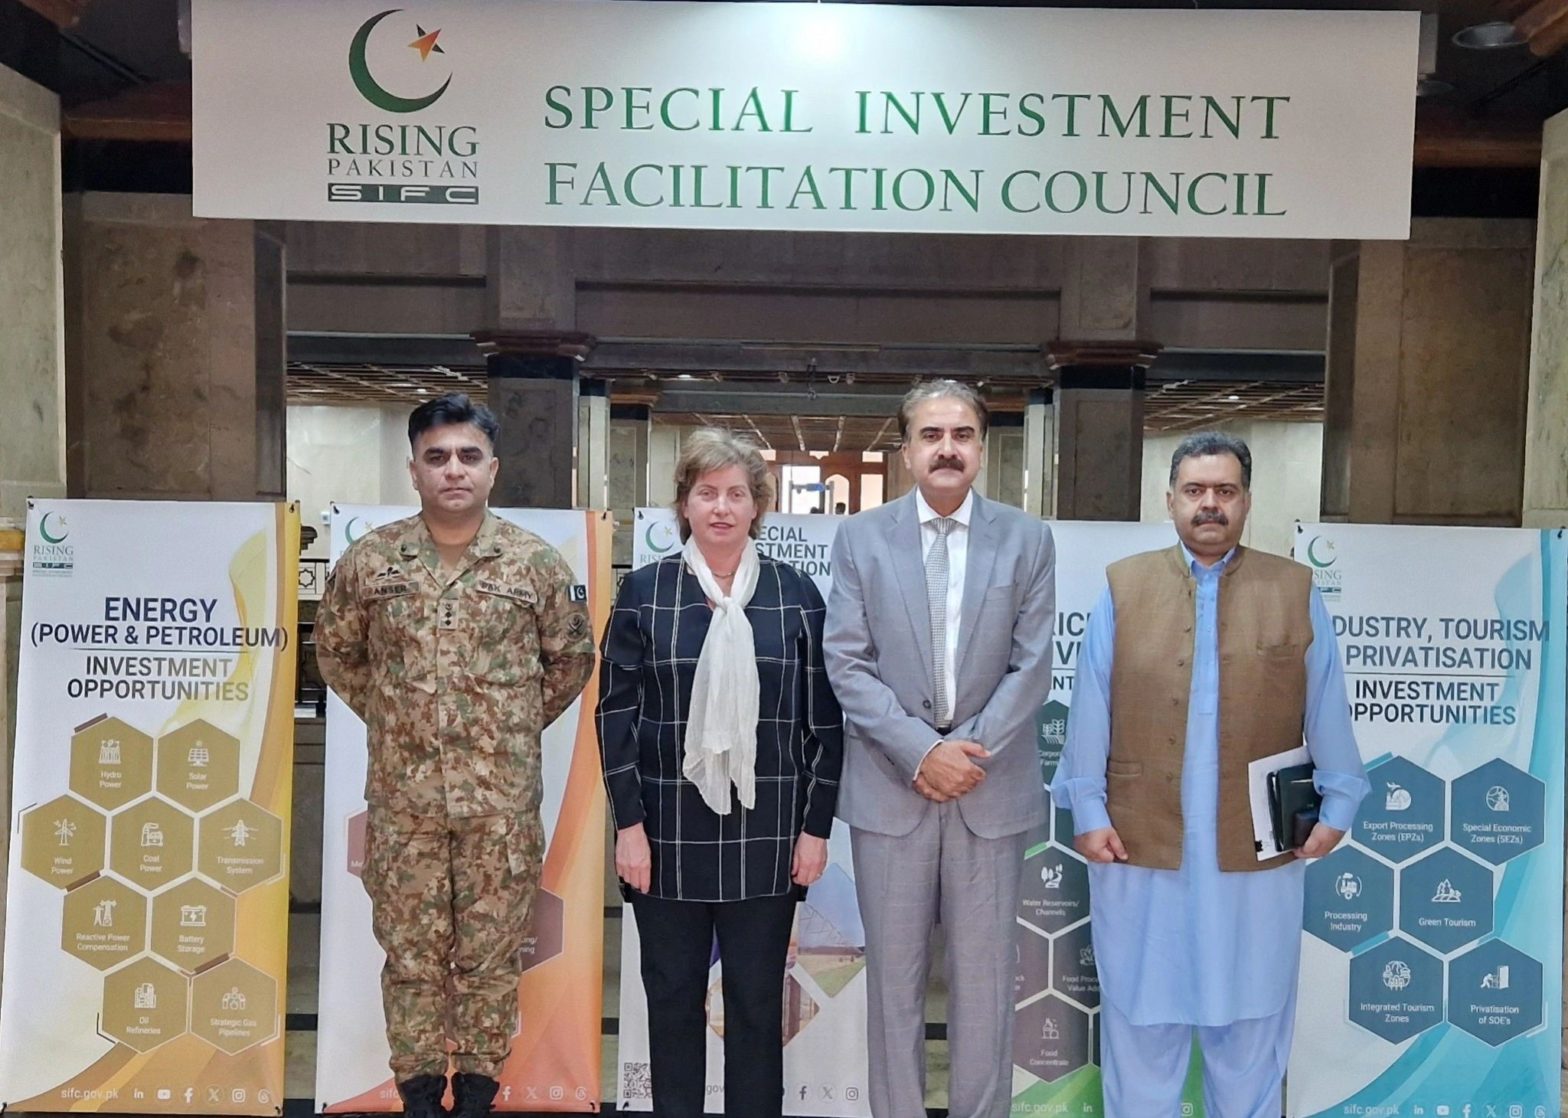 Rosie Glazebrook, Chief Executive of CWEIC visits Pakistan Special Investment Facilitation Council